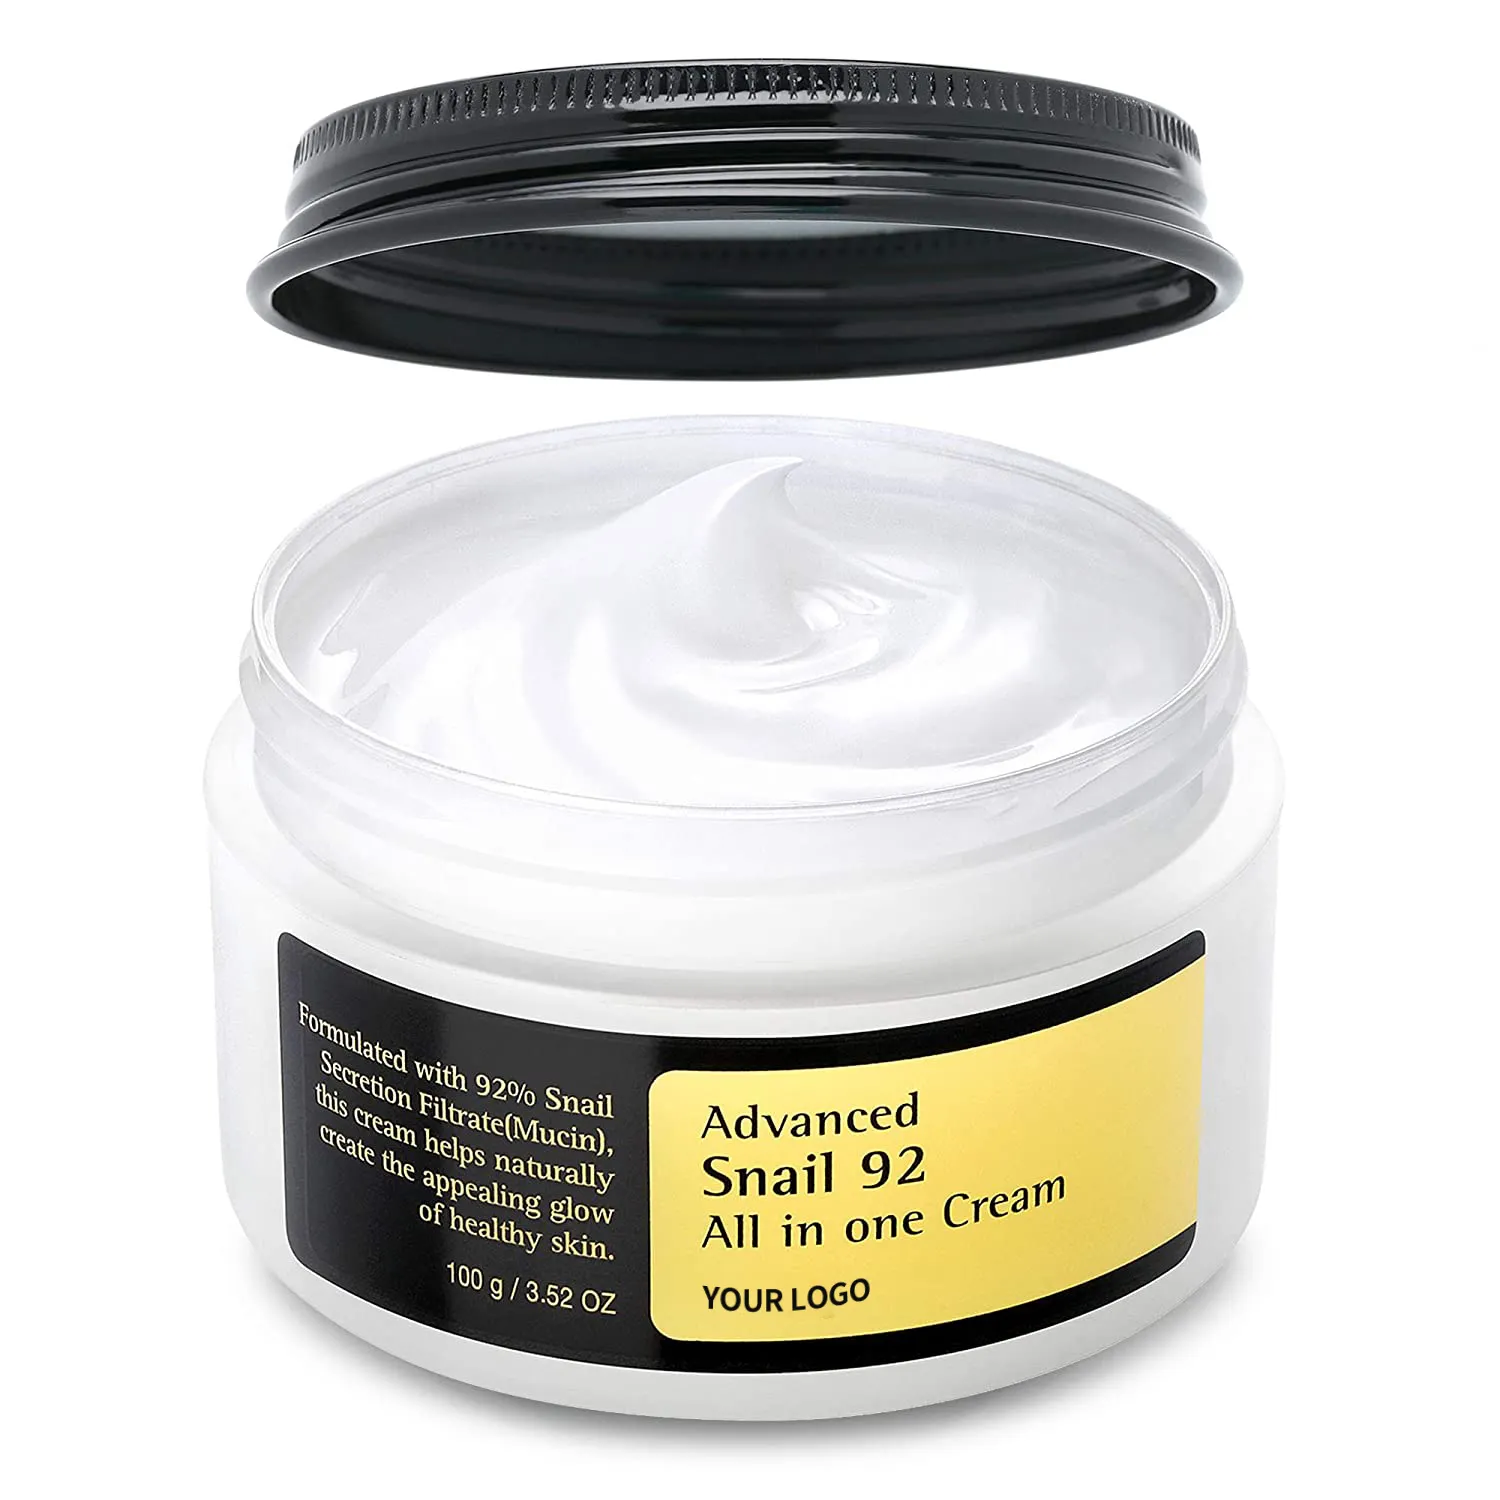 Advanced Snail 92 All in one Cream Moisturizing brushed snail cream